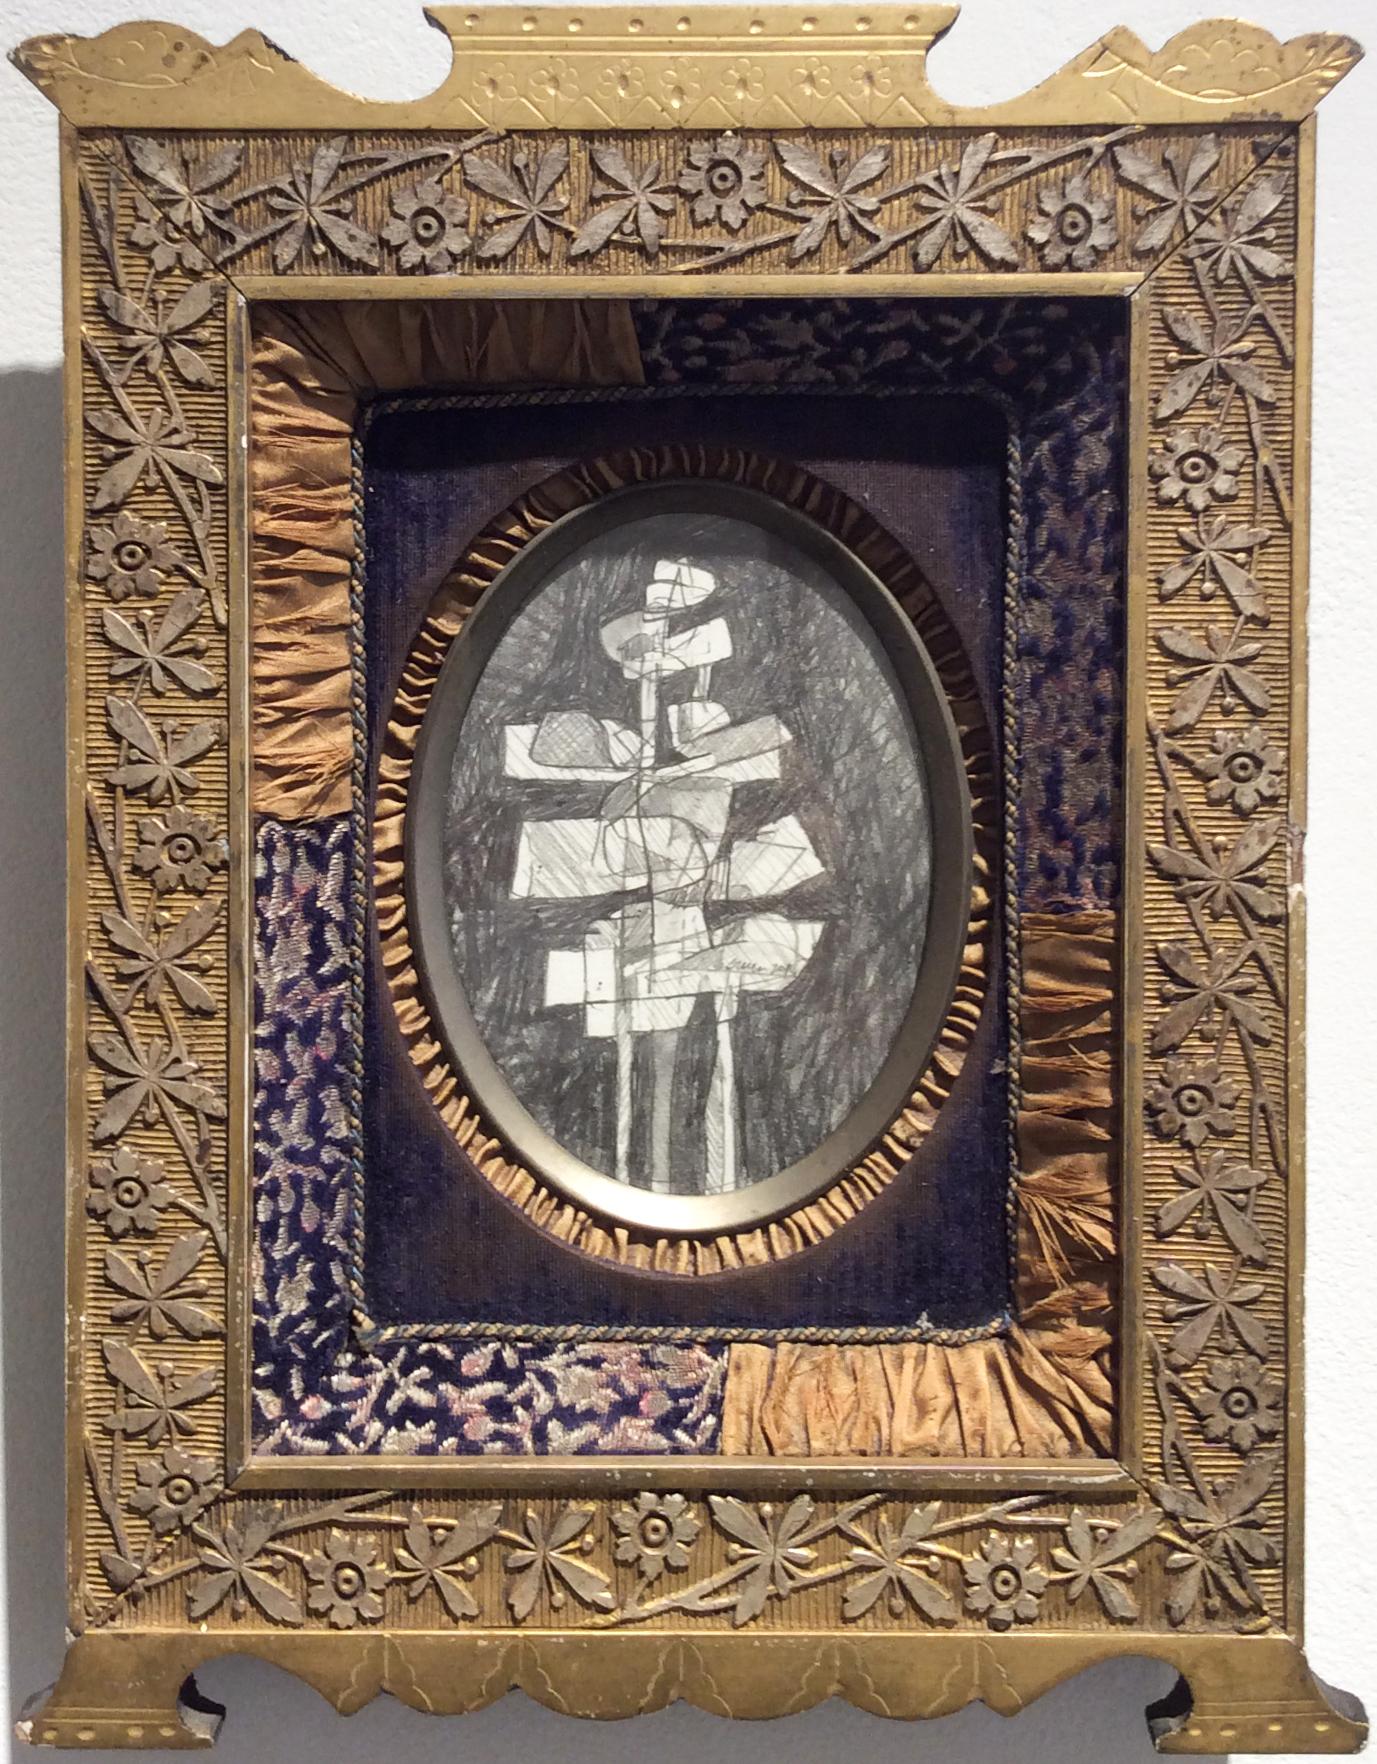 David Dew Bruner Abstract Drawing - Infanta XXIII (Abstract Cubist Figure in Vintage Embroidered Gold Frame)